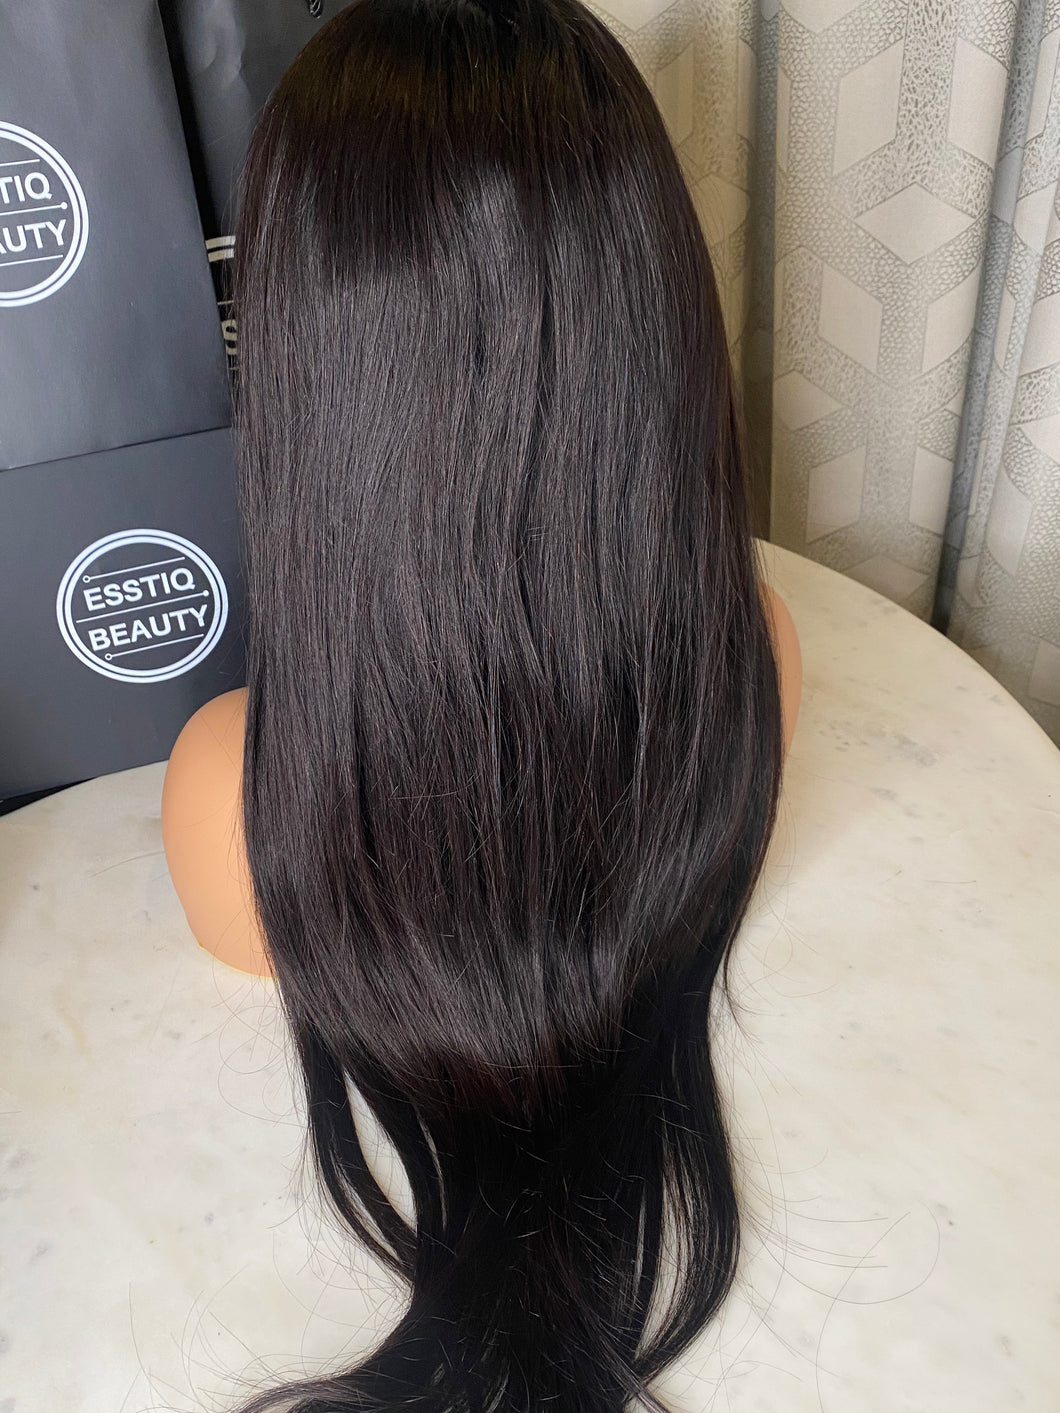 ESSTIQ HD Luxury Lace Front Wig -  Straight Hair 13X6 lace